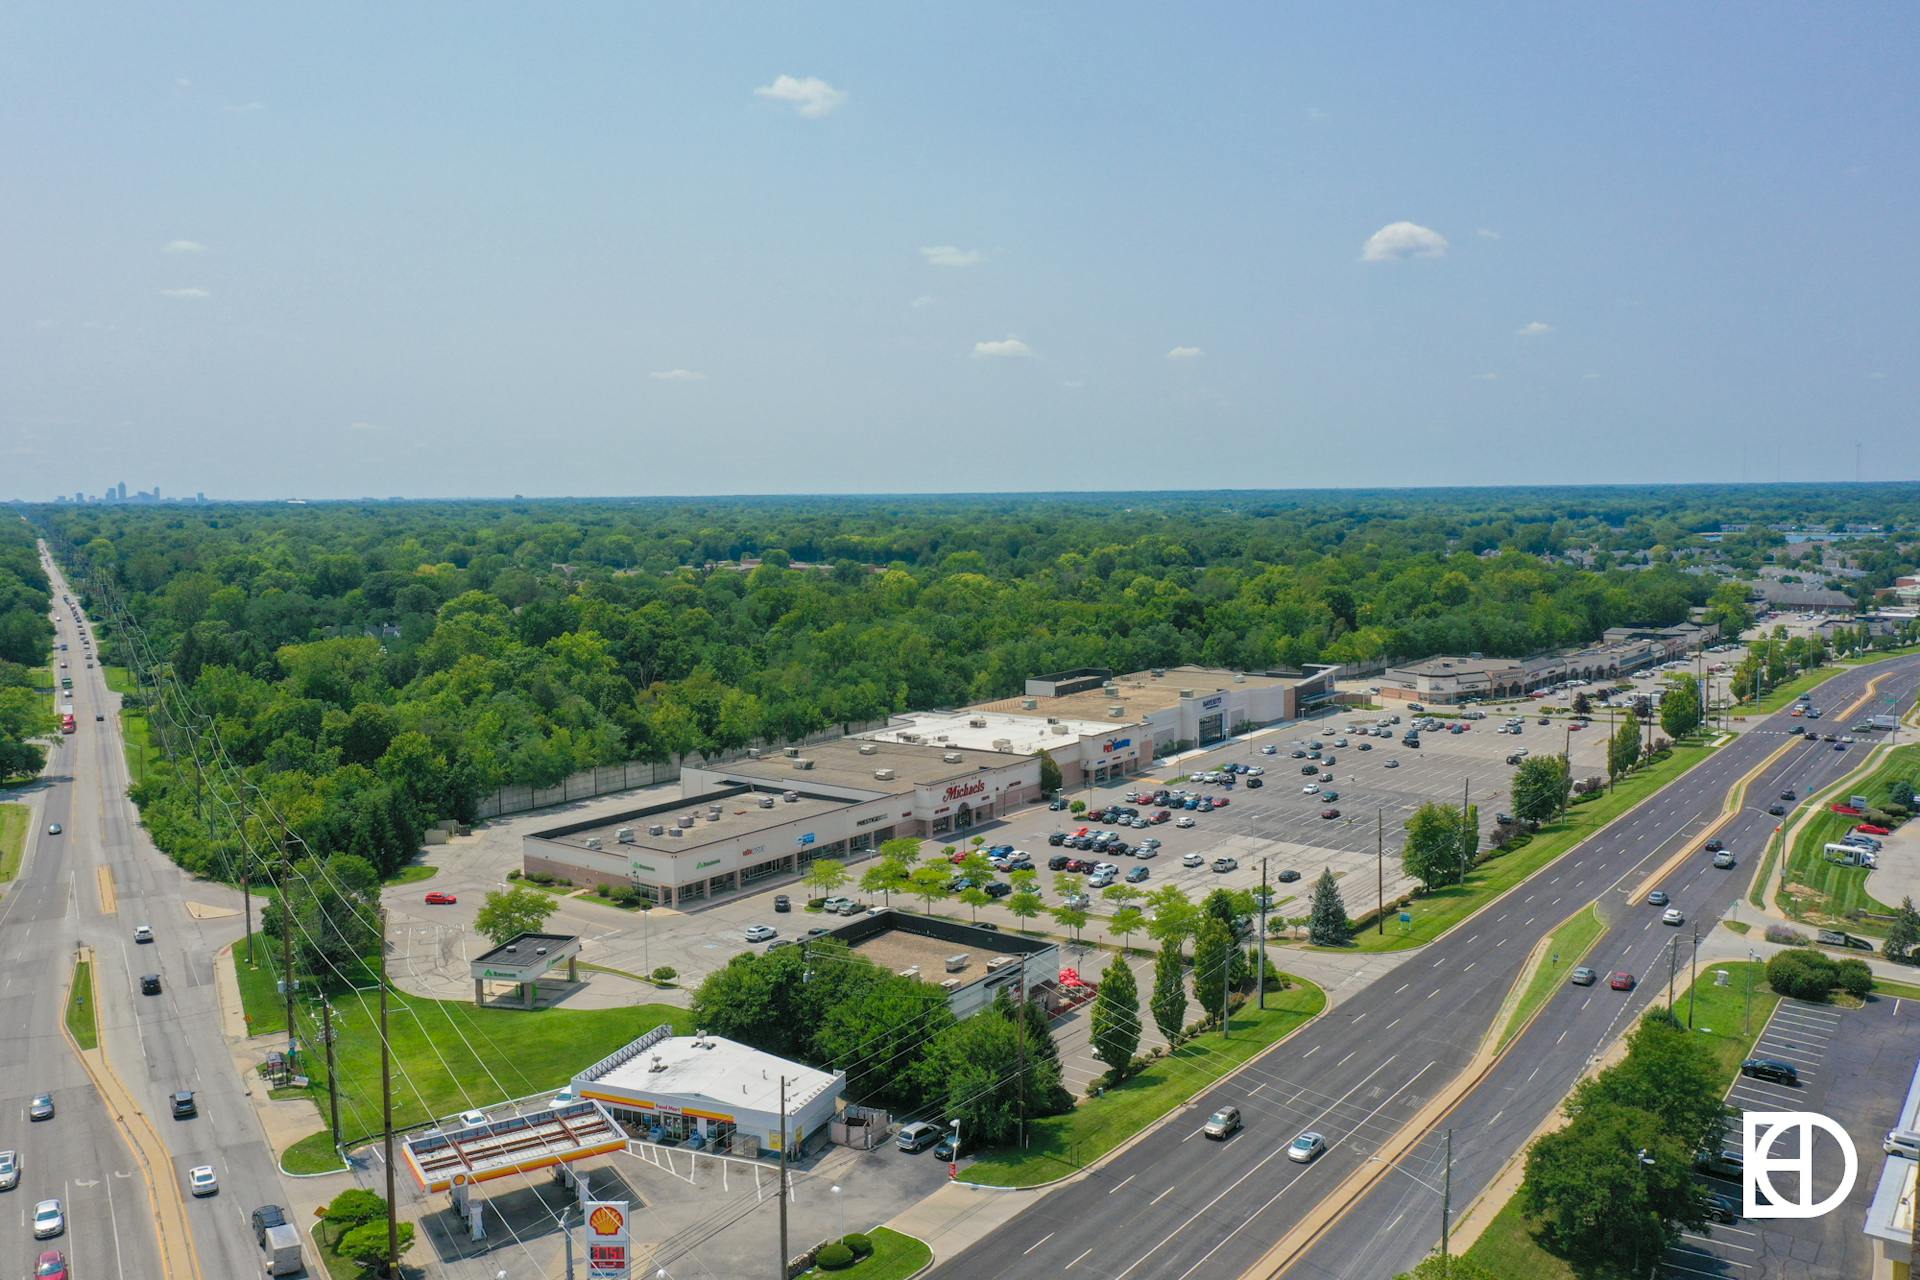 Aerial photo of Clearwater Springs Shopping Center, showing Michaels, PetSmart, etc